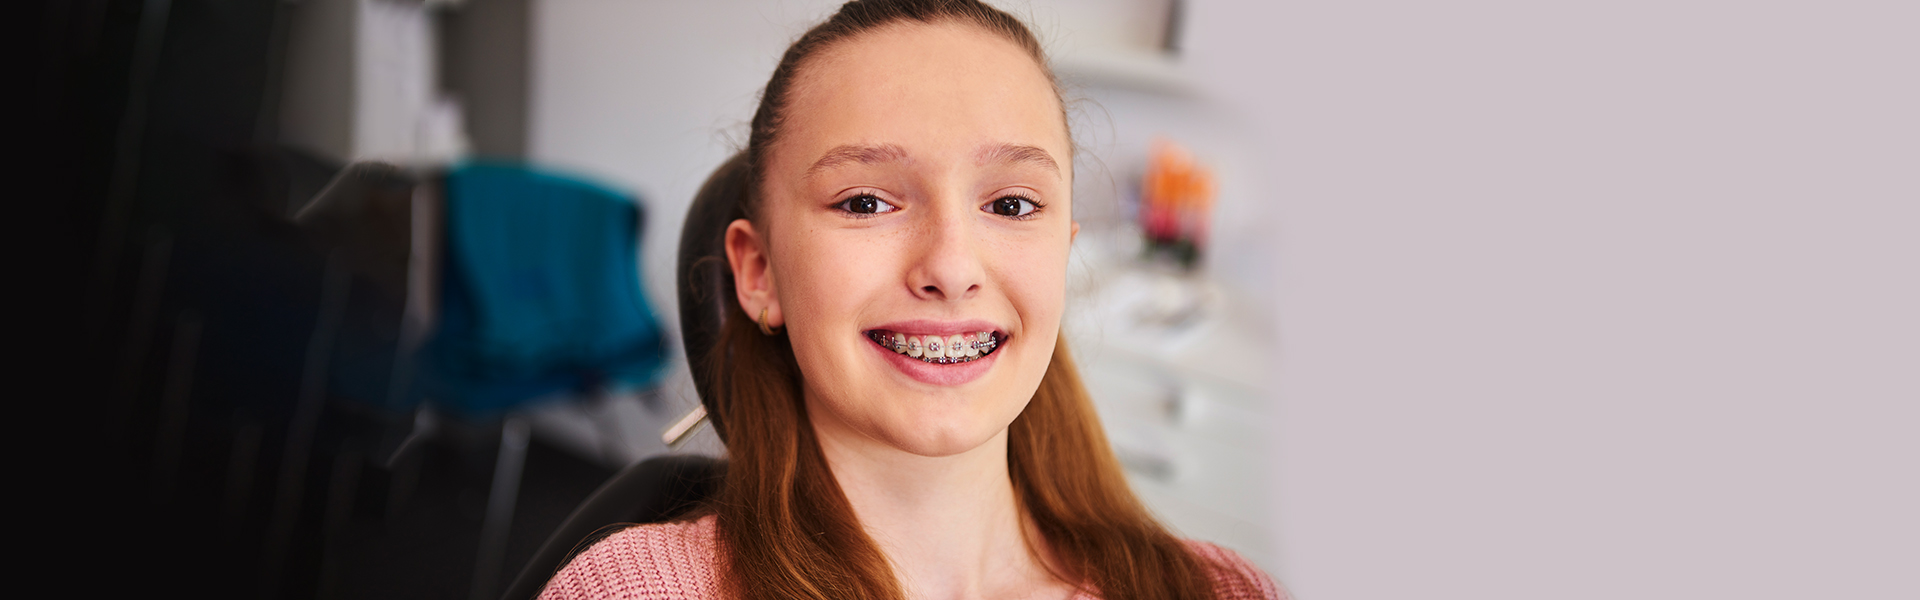 Orthodontist and Retainers for Kids